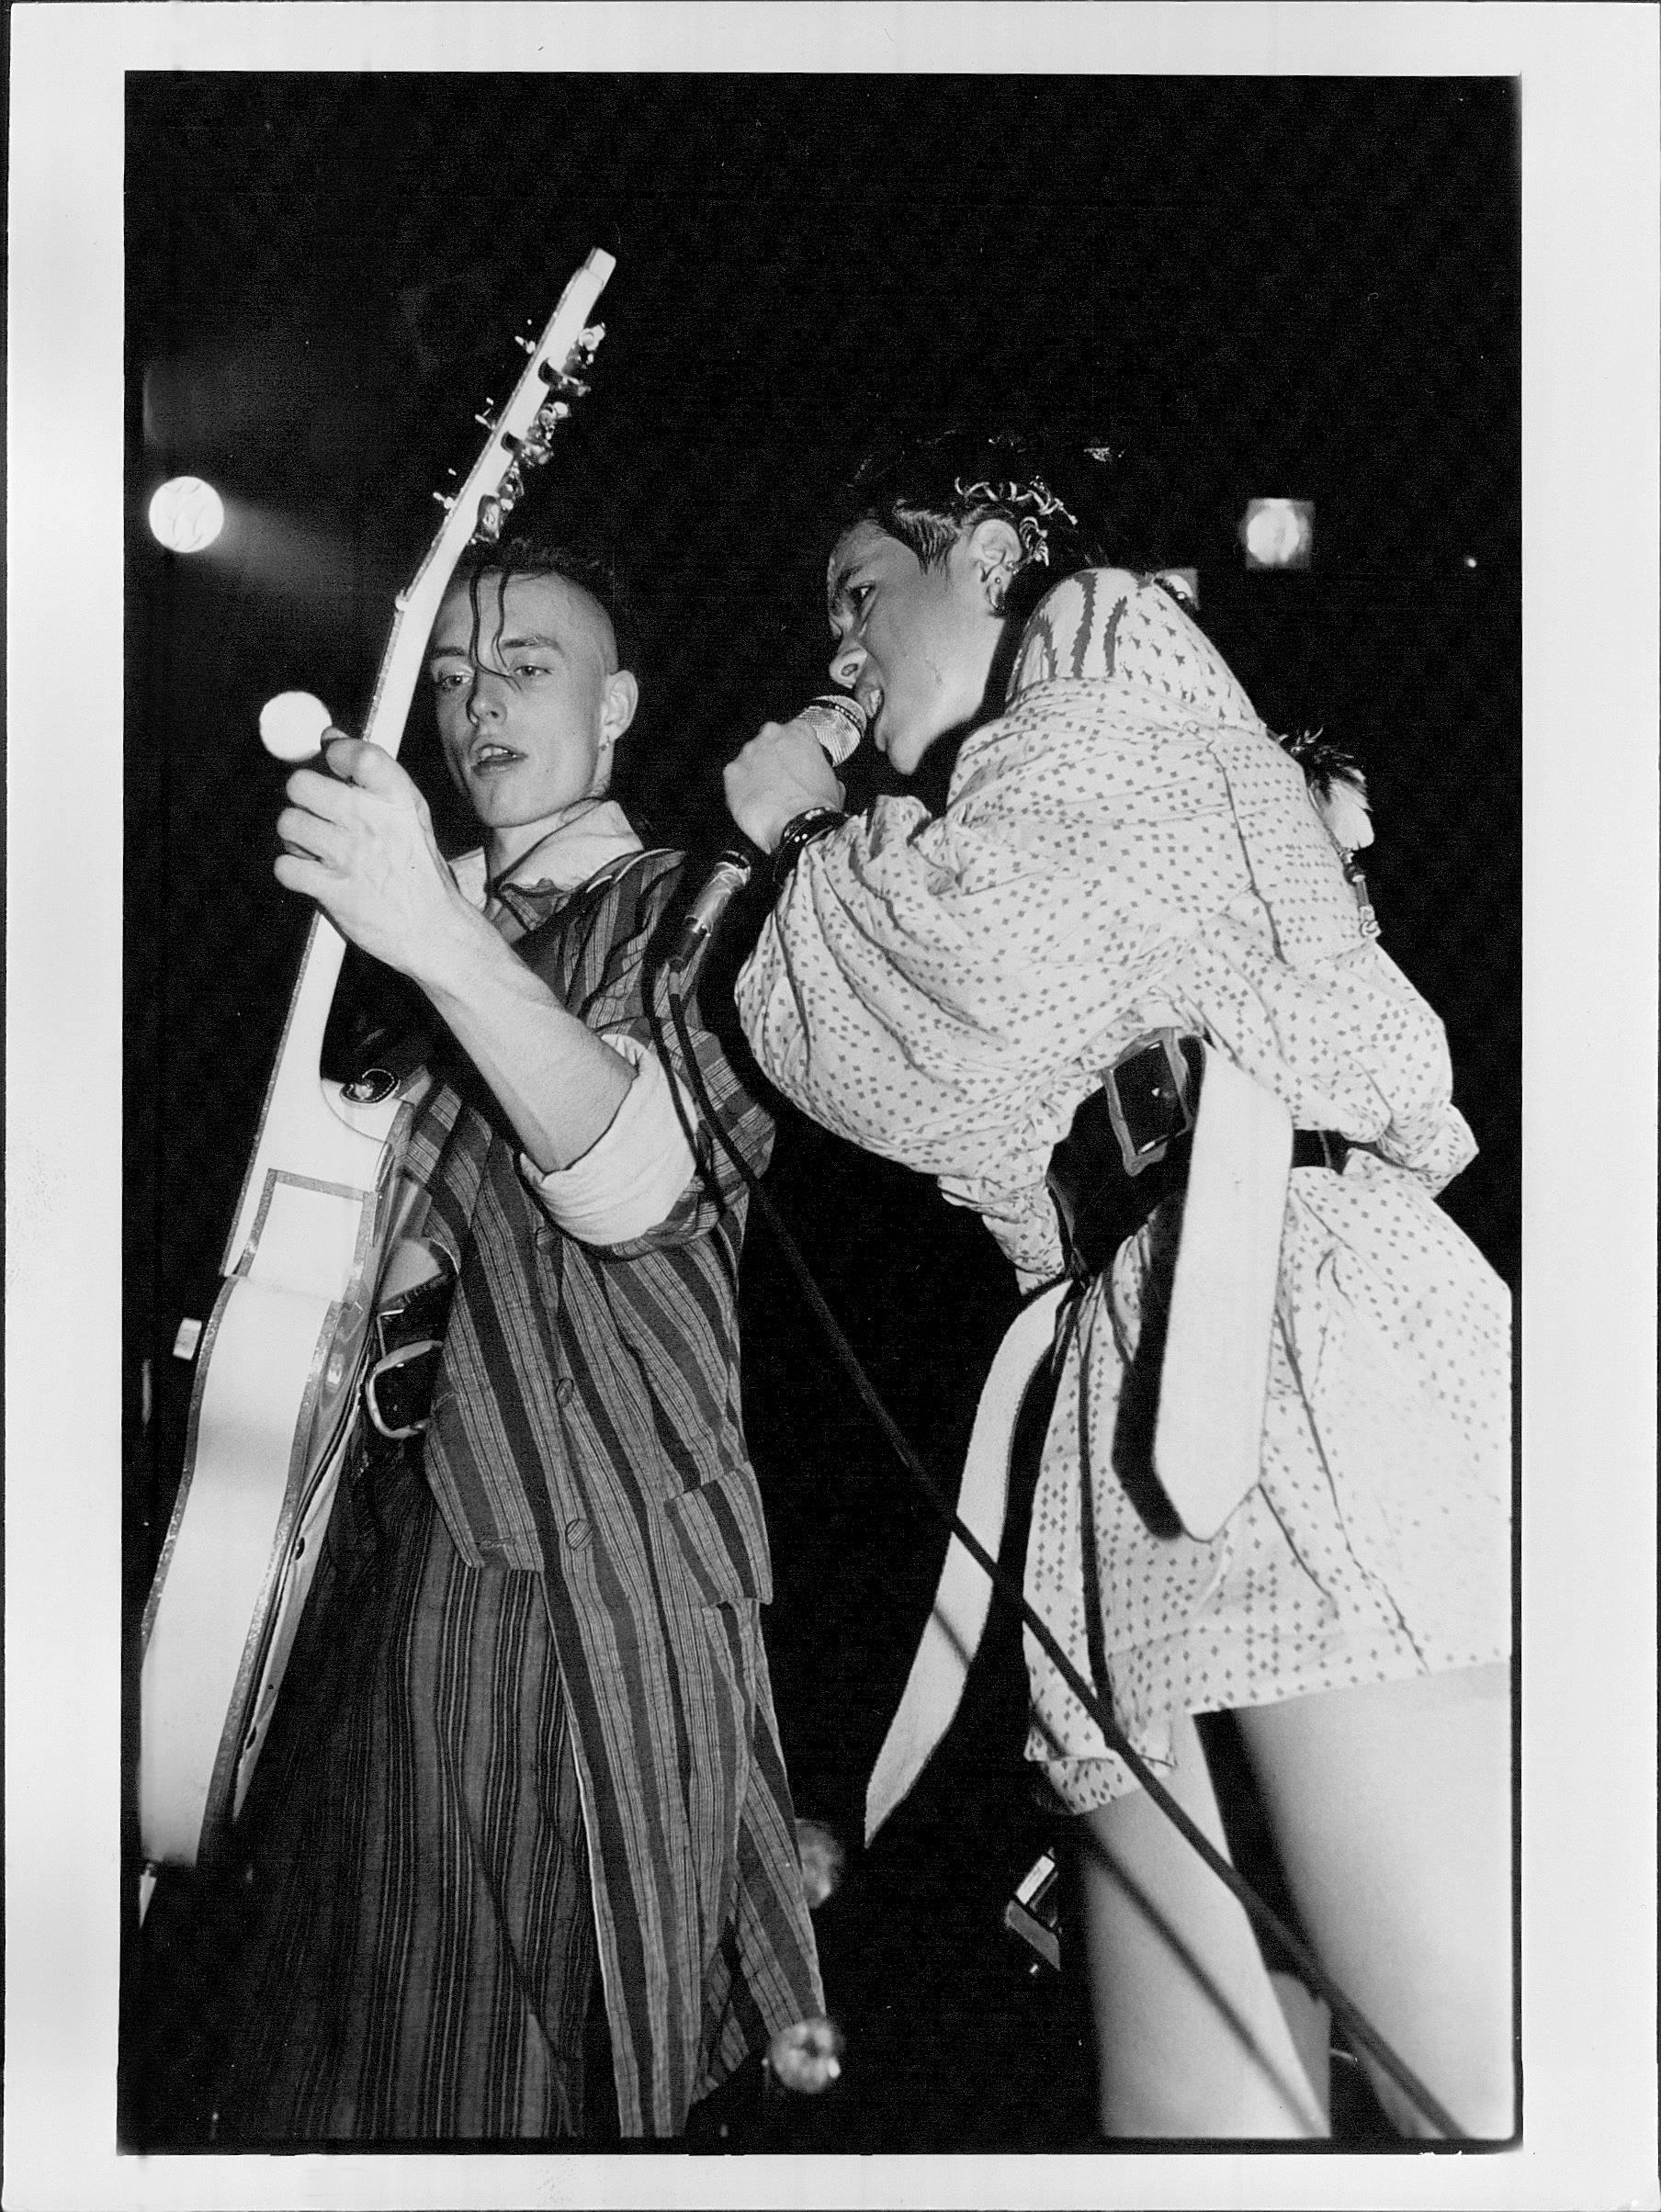 Steve Rapport Black and White Photograph - Bow Wow Wow Rocking Out on Stage Vintage Original Photograph